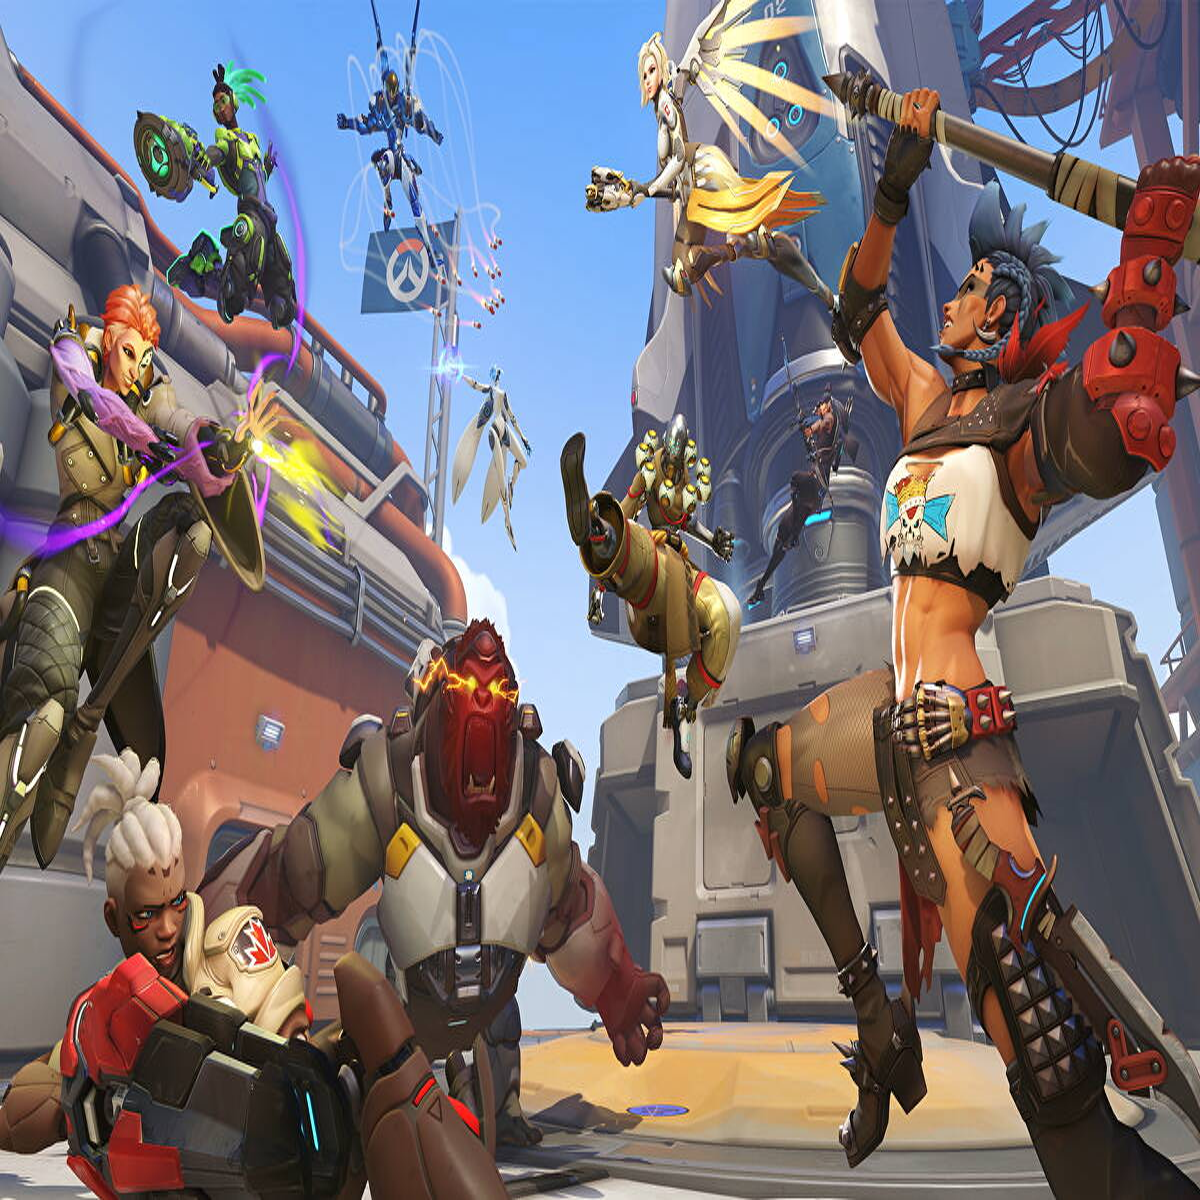 Overwatch 2 and other Blizzard games are headed to Steam